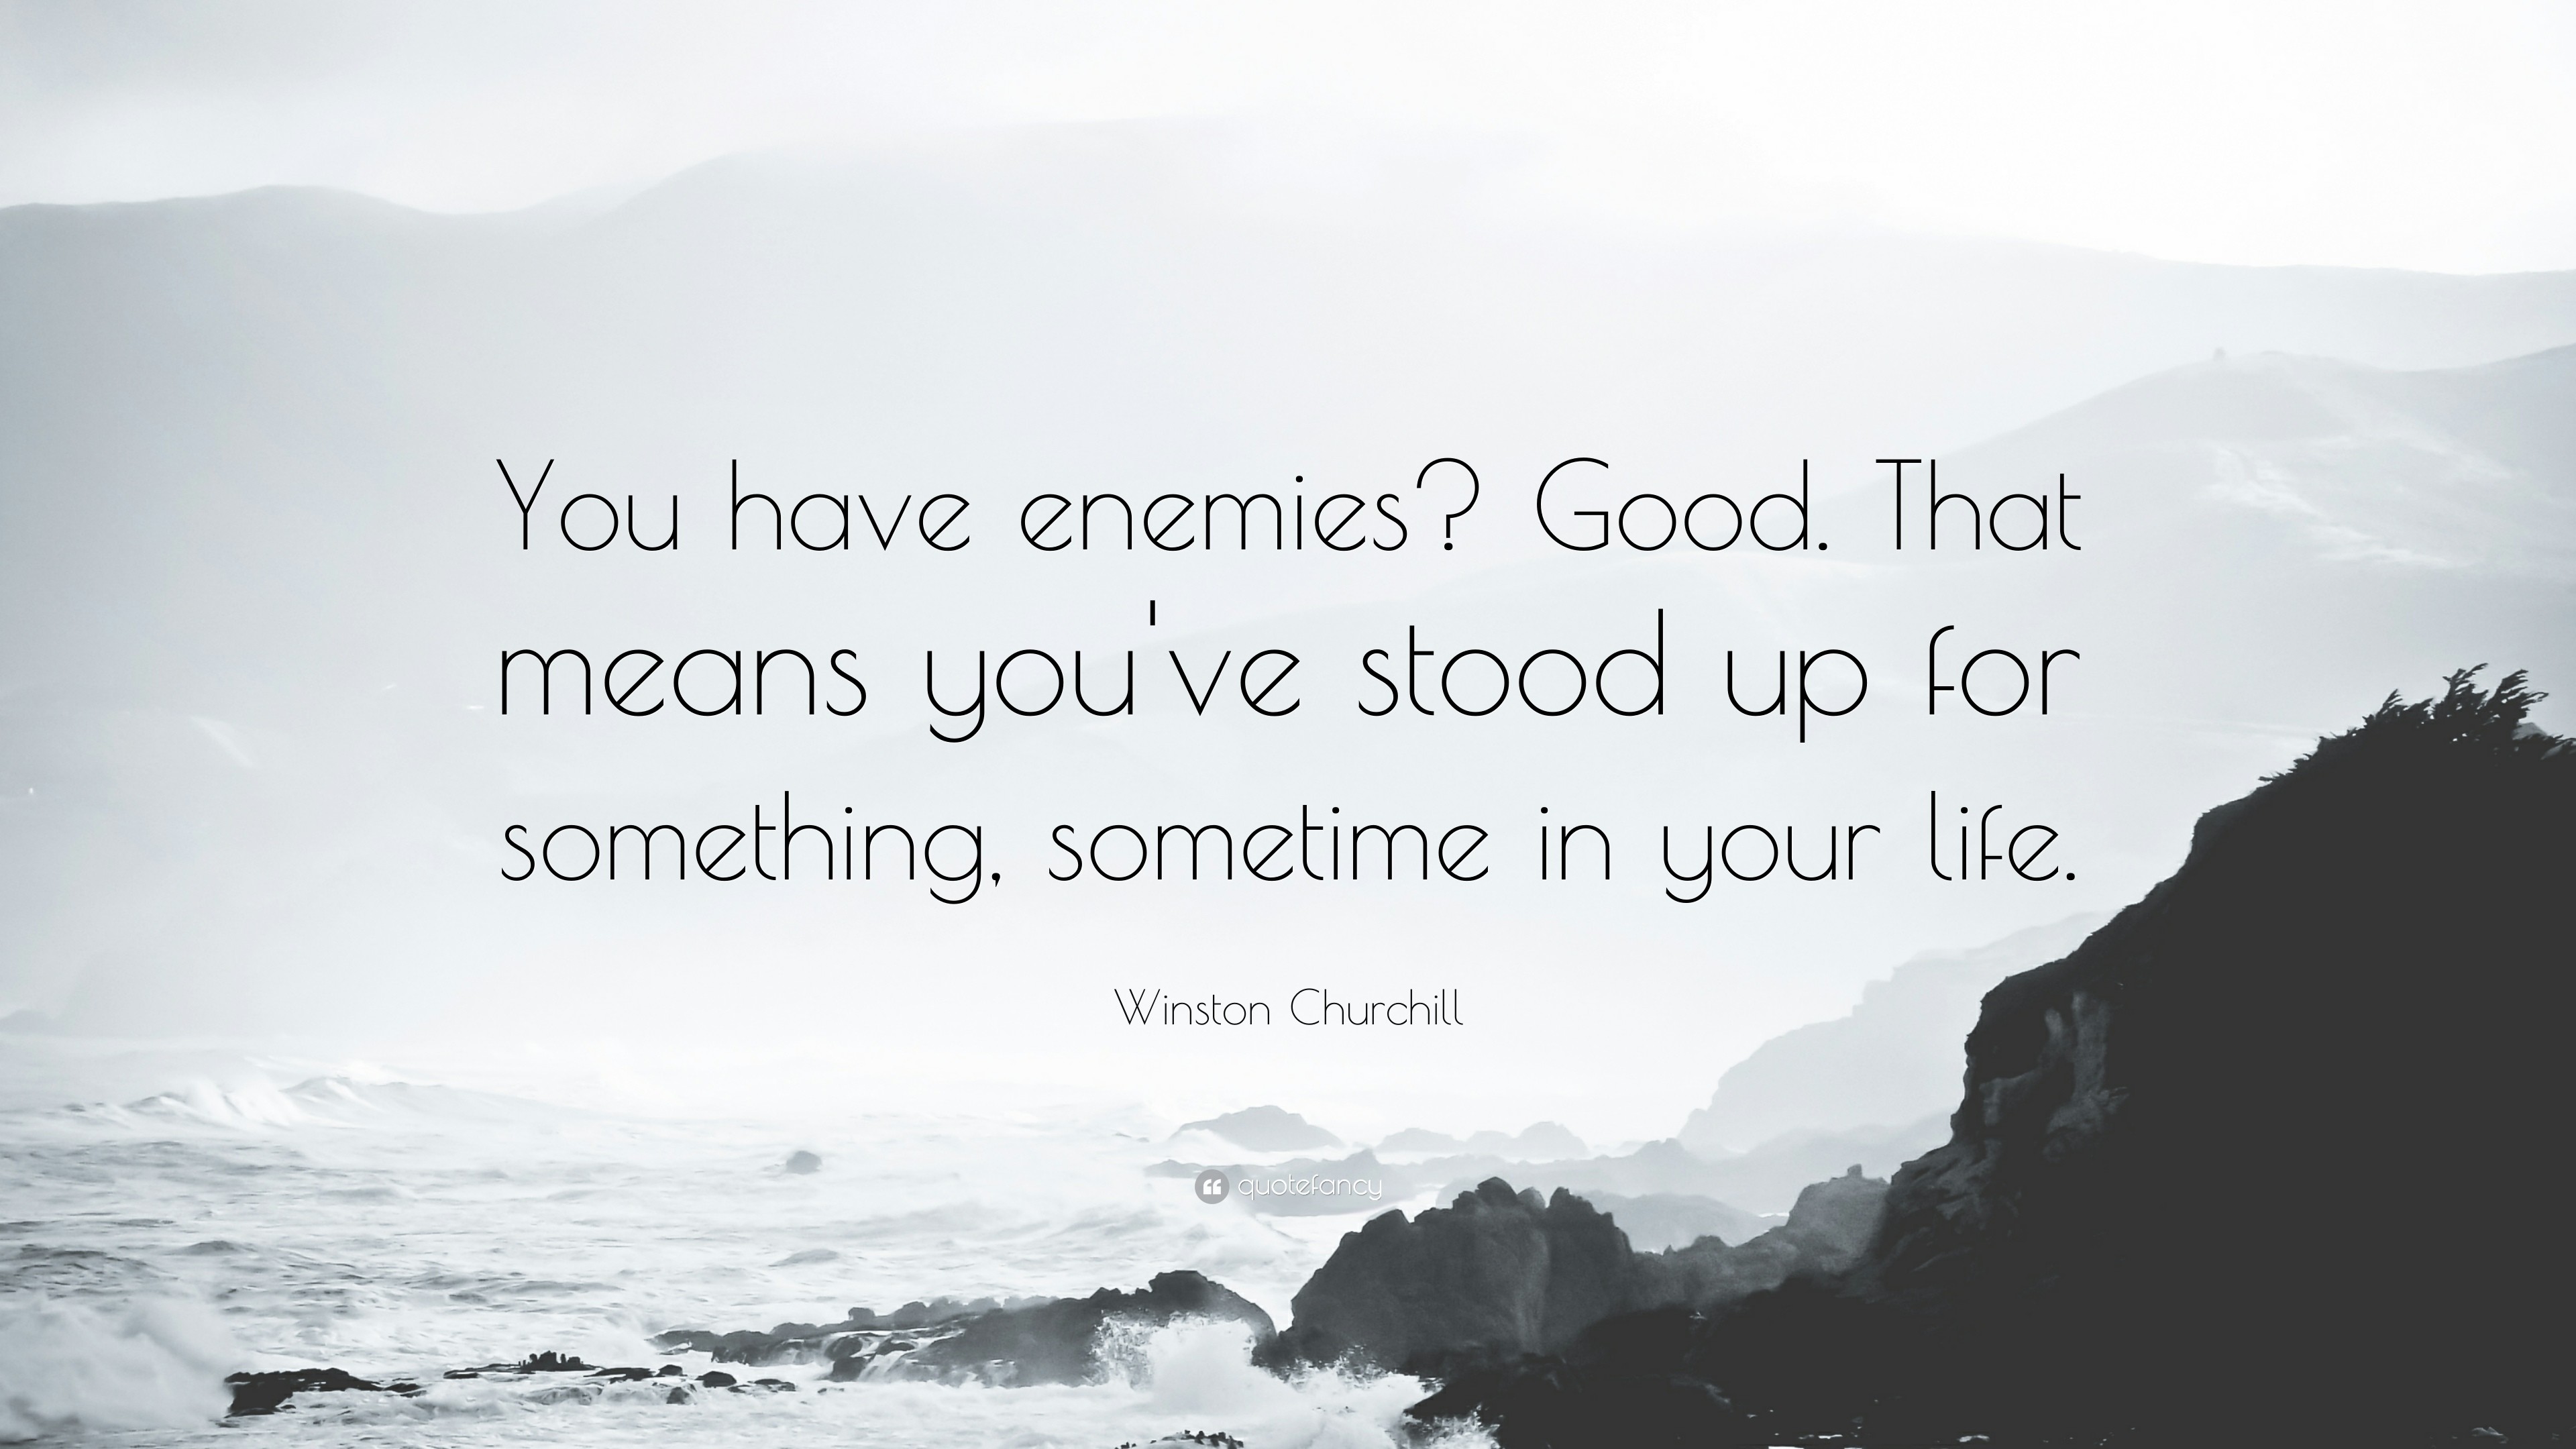 3840x2160 Life Quotes: “You have enemies? Good. That means you've stood